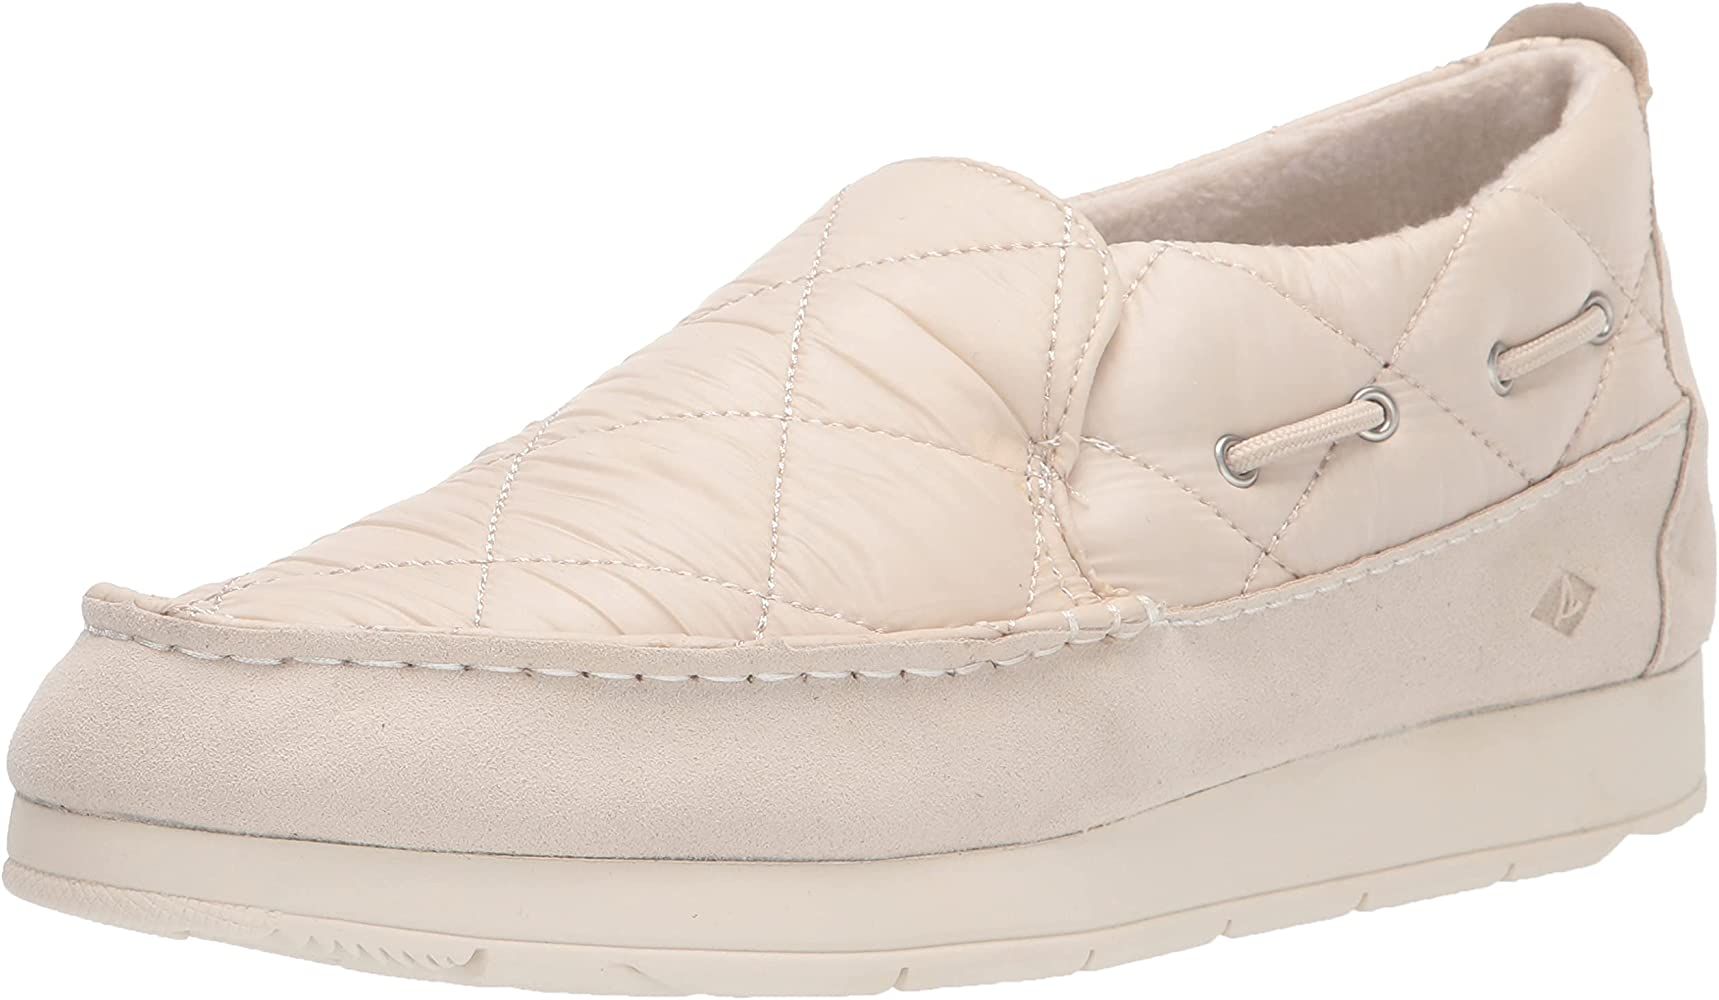 Sperry Women's Moc-Sider - Fashionable and Comfy Slide-On Shoes Featuring Faux Fur Linings, Decor... | Amazon (US)